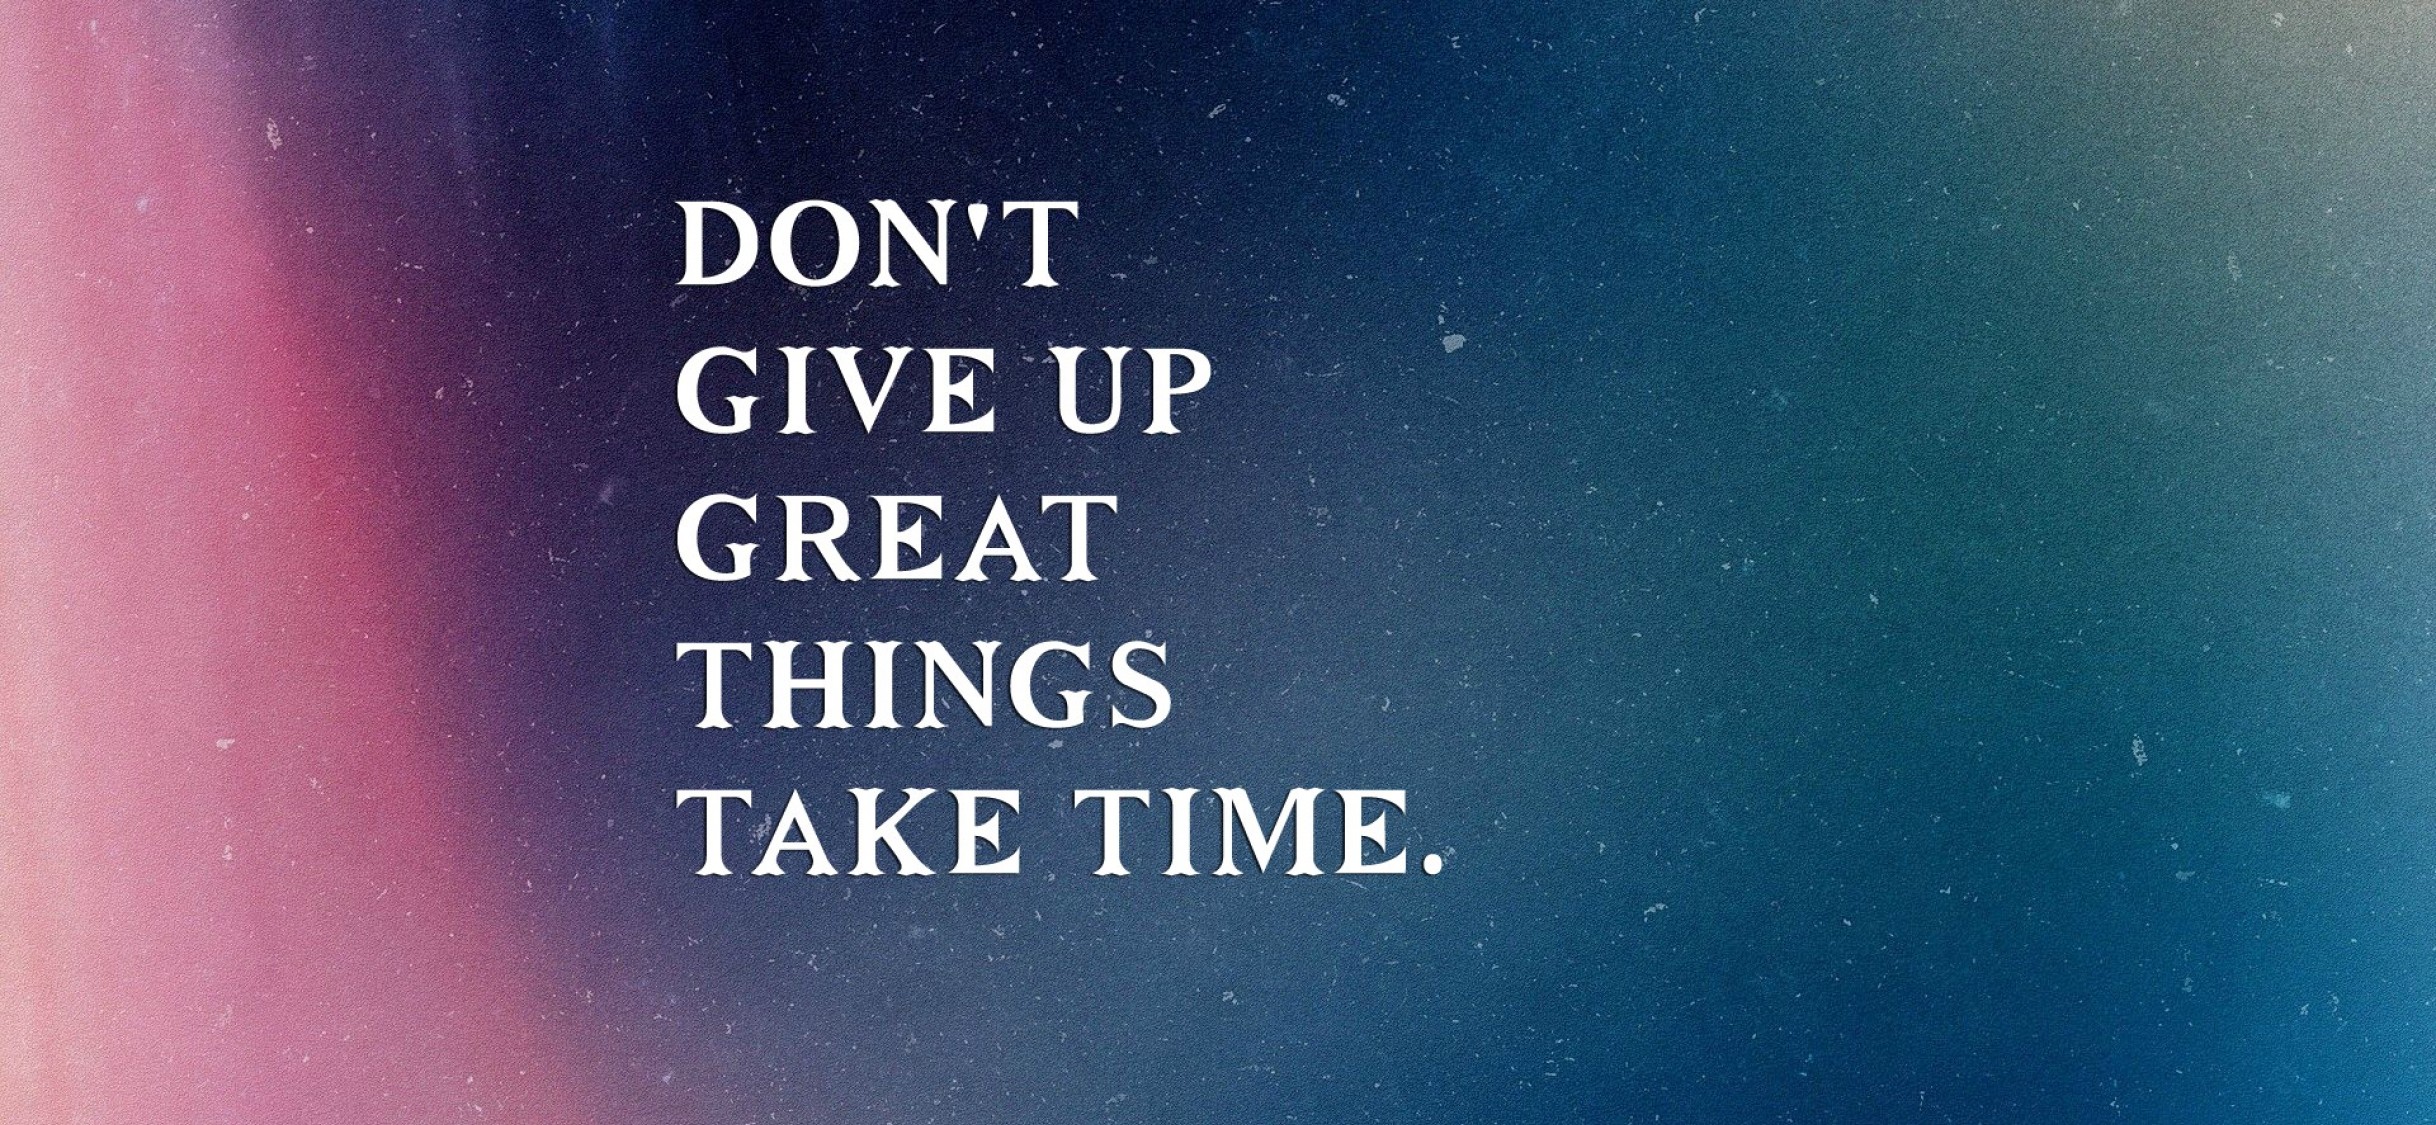 Never Give Up Great Things Take Time Wallpaper for Desktop and Mobiles - iP...